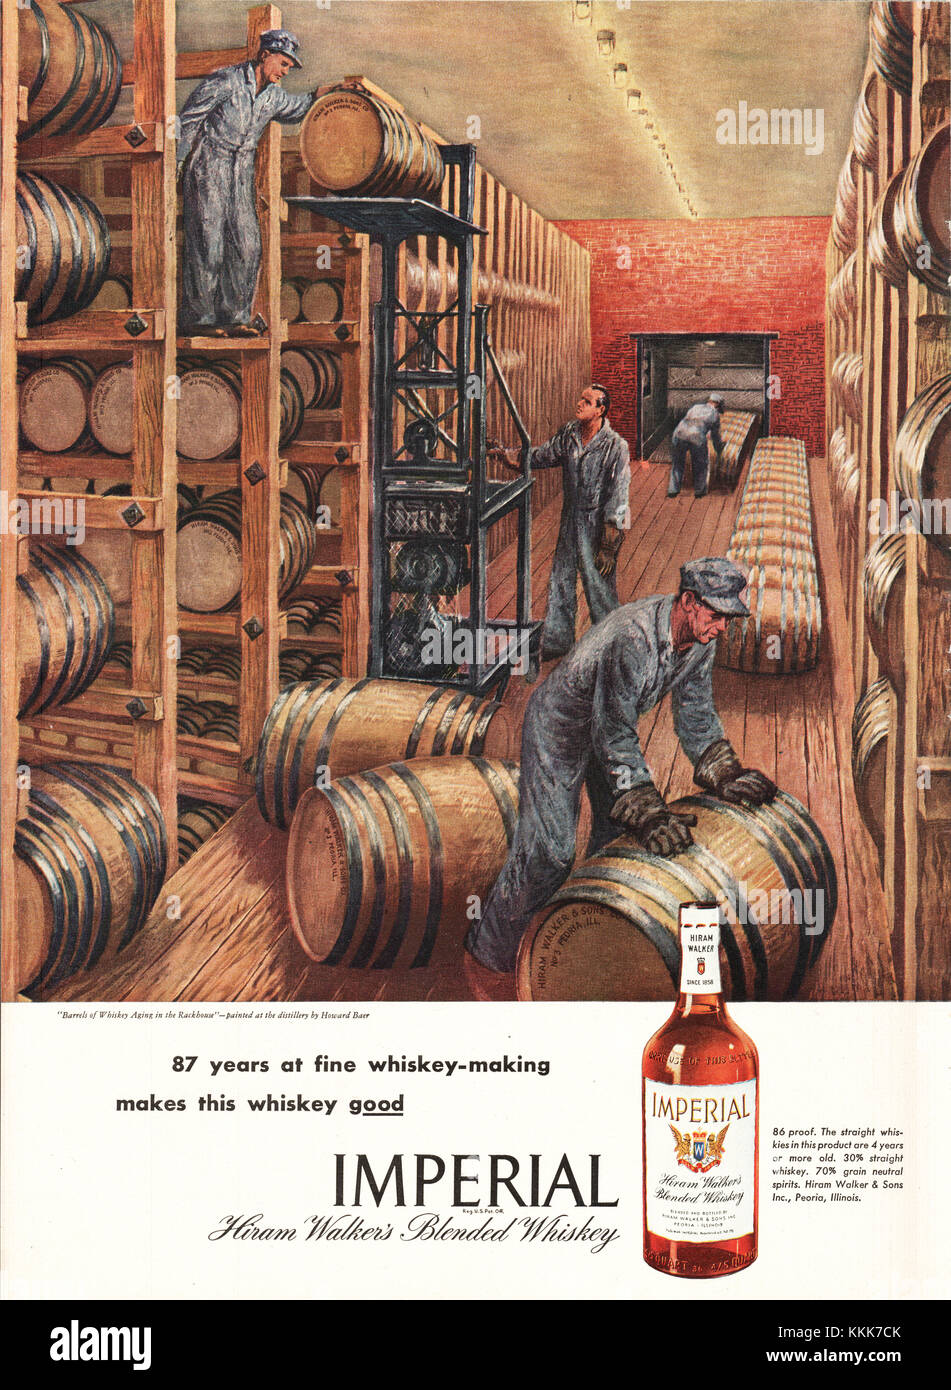 Hiram Walker and the Reclamation of Canadian Whisky - Paste Magazine